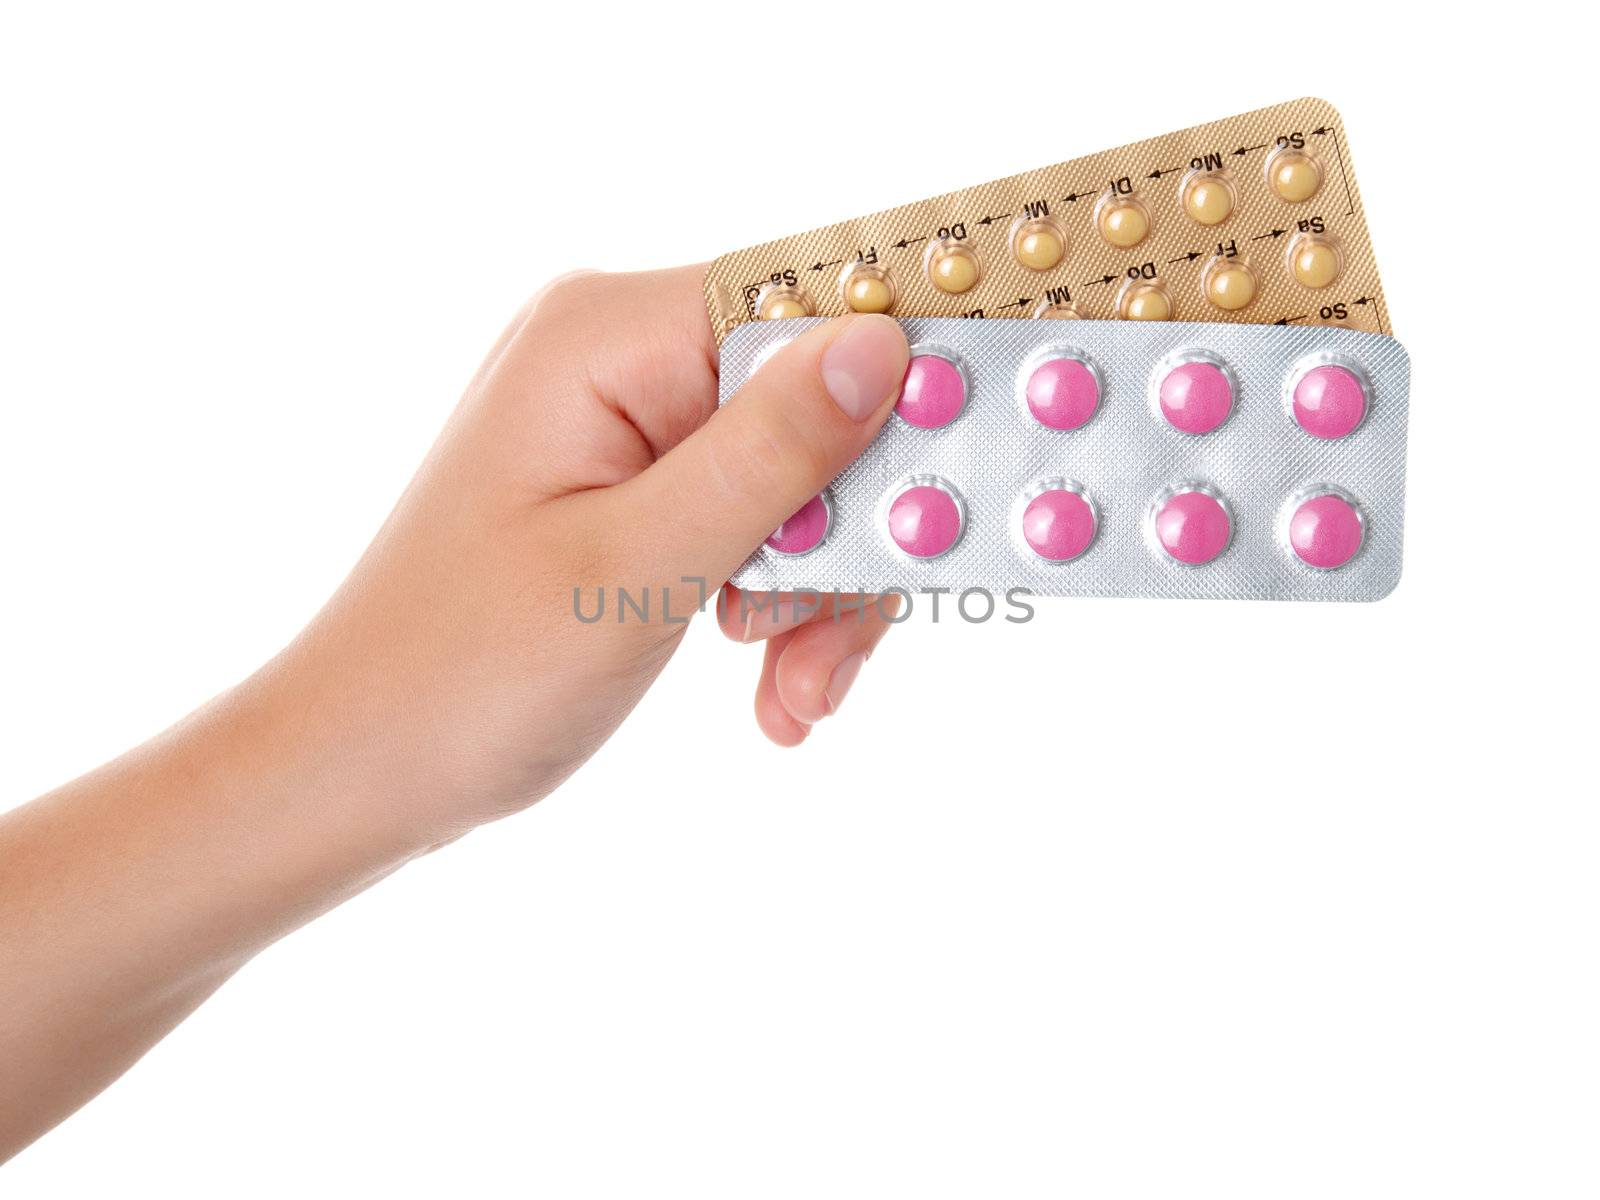 tablets (Birth Control Pills) in the hand, isolated on white background 